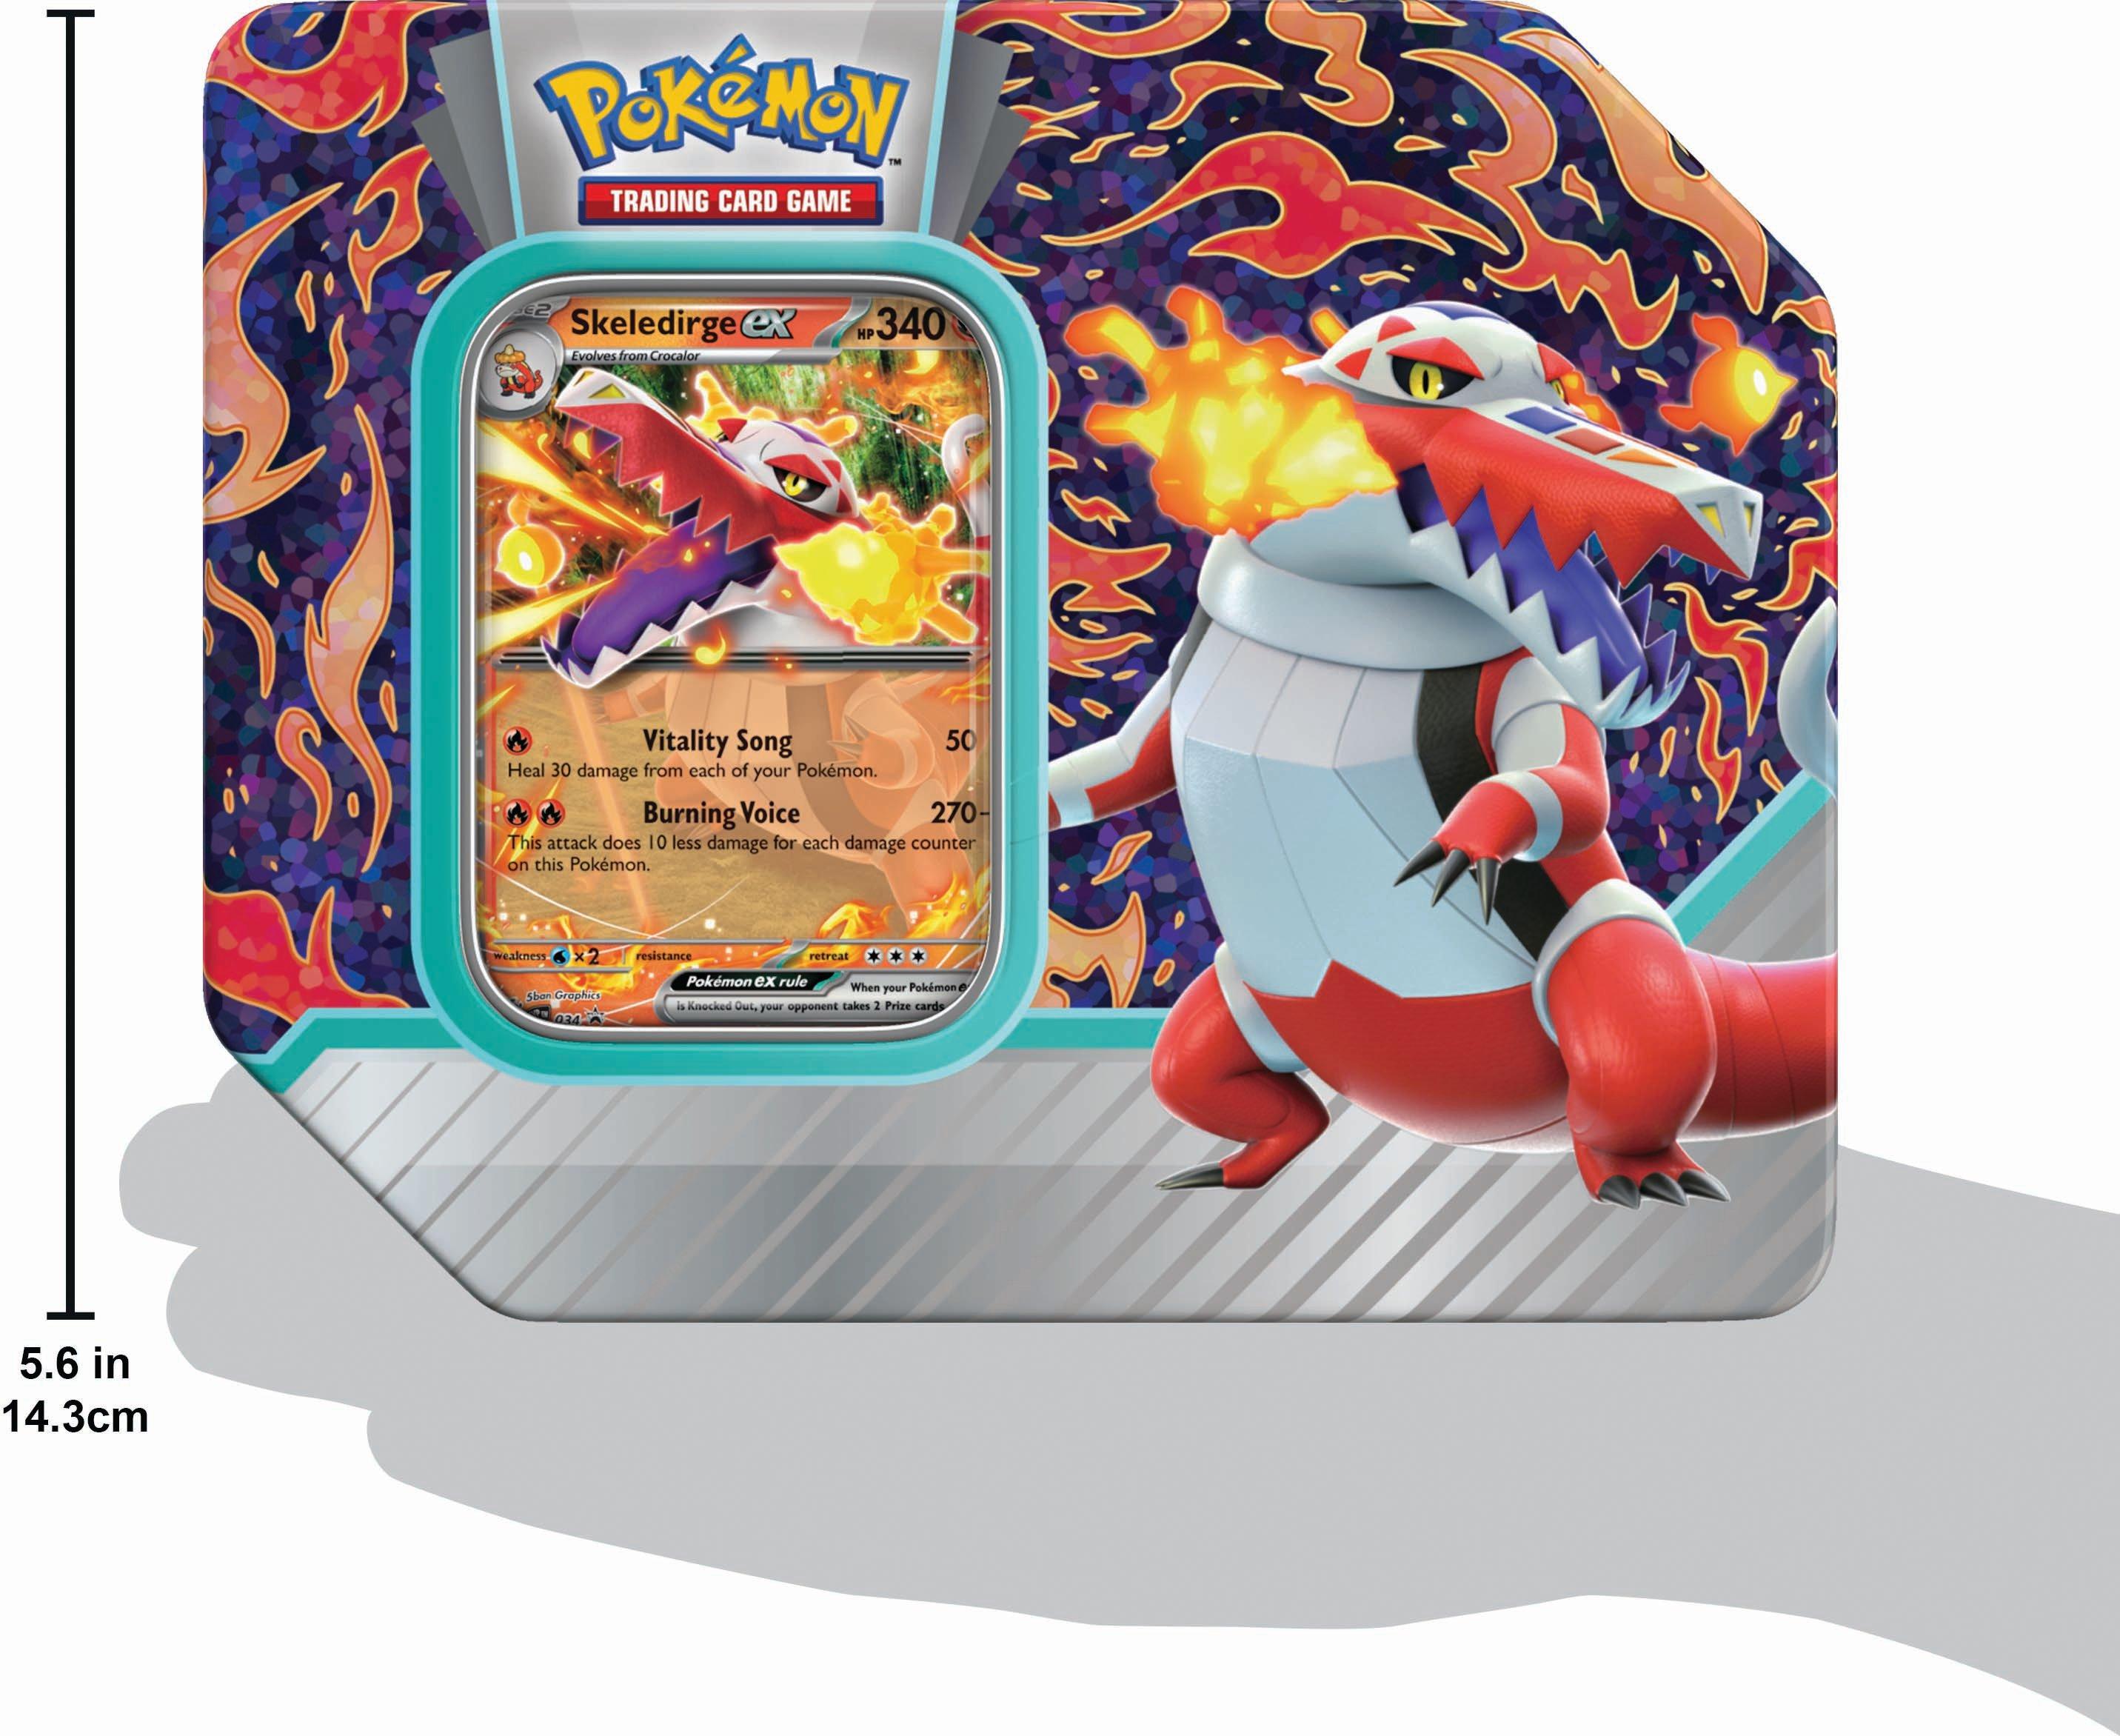 Pokémon Trading Card Game: Paldea Legends Tin Styles May Vary 210-87285 -  Best Buy